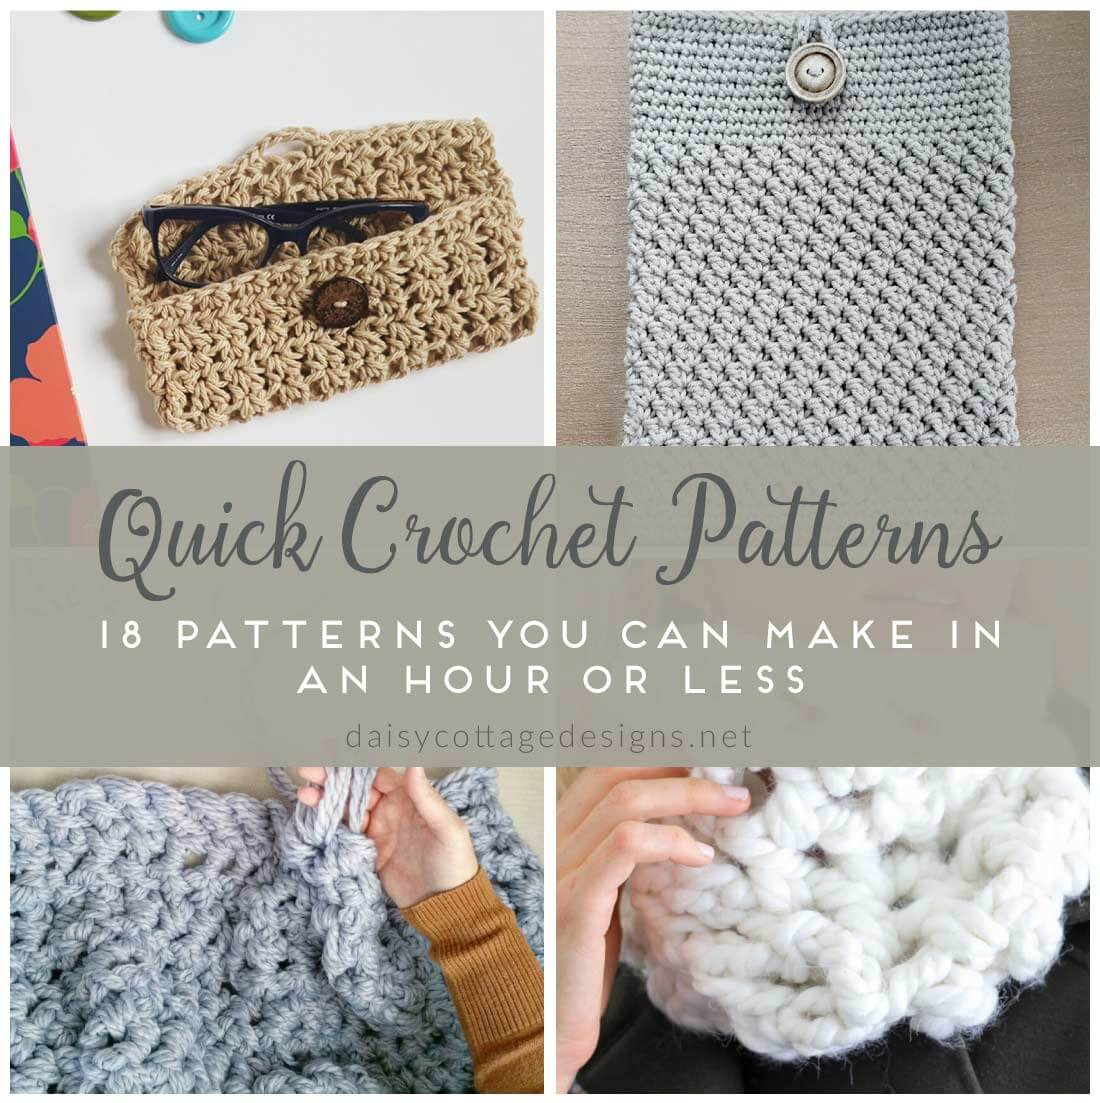 Quick And Easy Crochet Patterns Easy Crochet Patterns Free Crochet Patterns On Daisy Cottage Designs